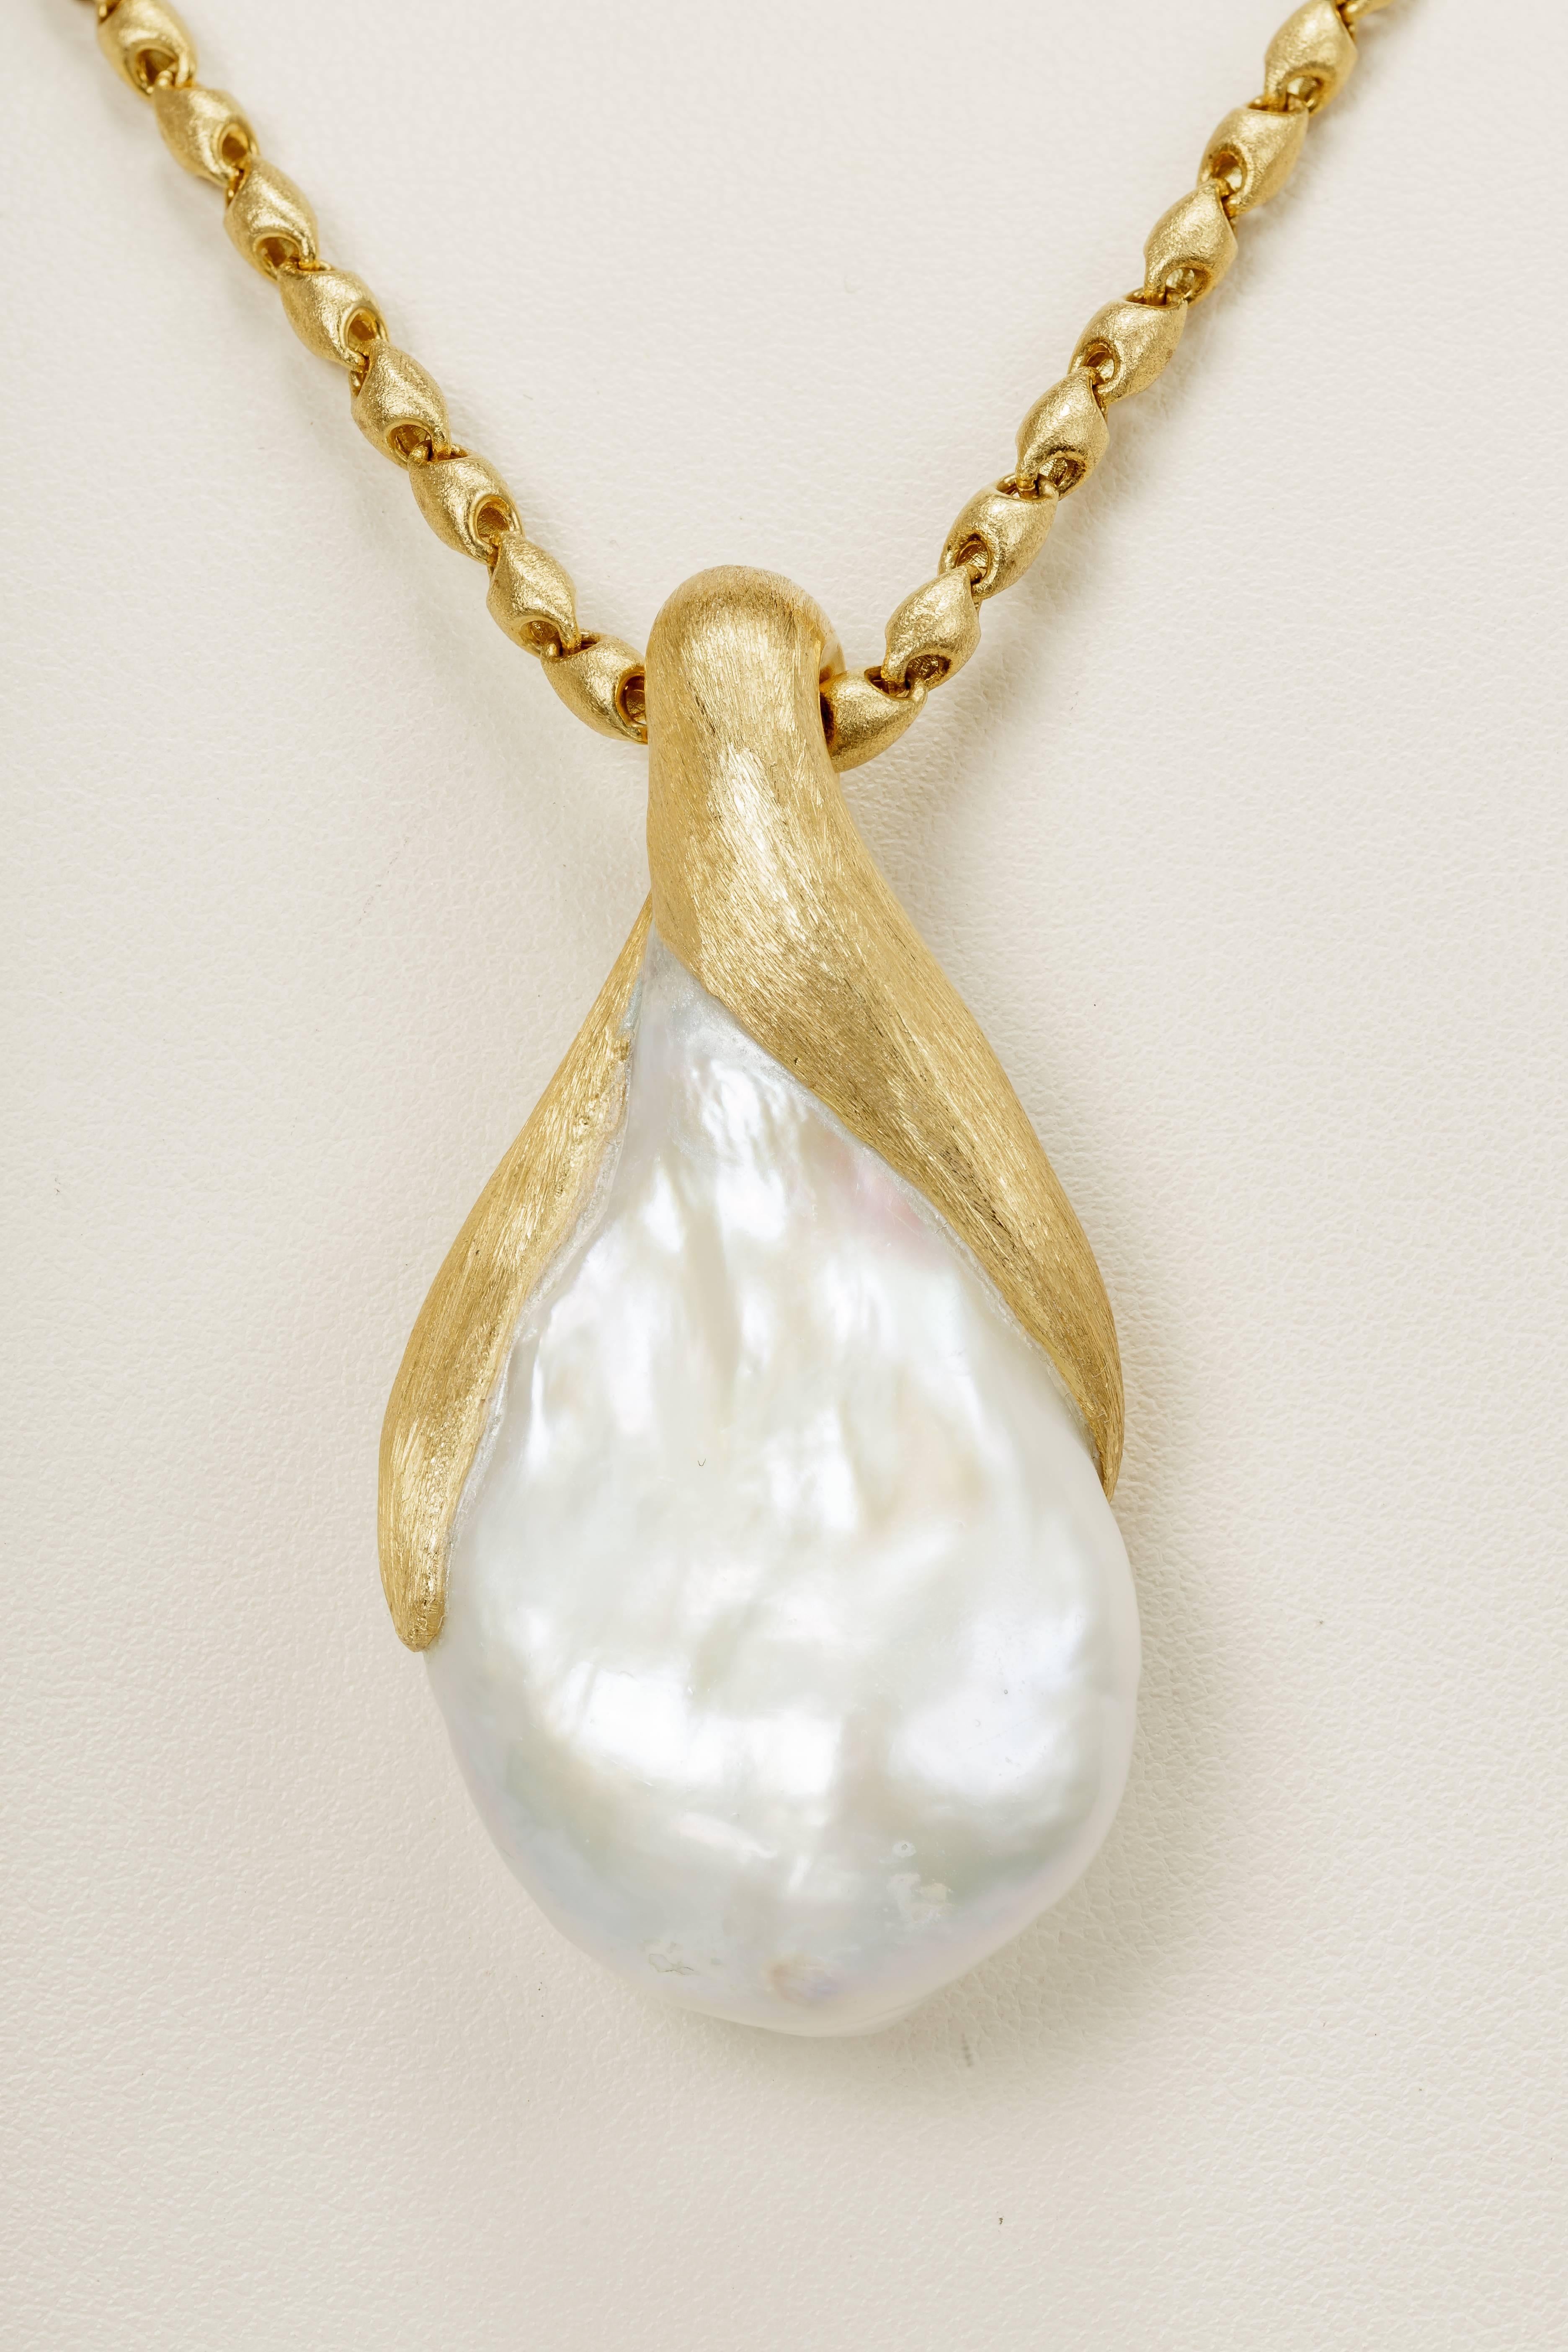 Yvel Large White Baroque Pearl Pendant Necklace 18 Karat Yellow Gold  In New Condition For Sale In Houston, TX